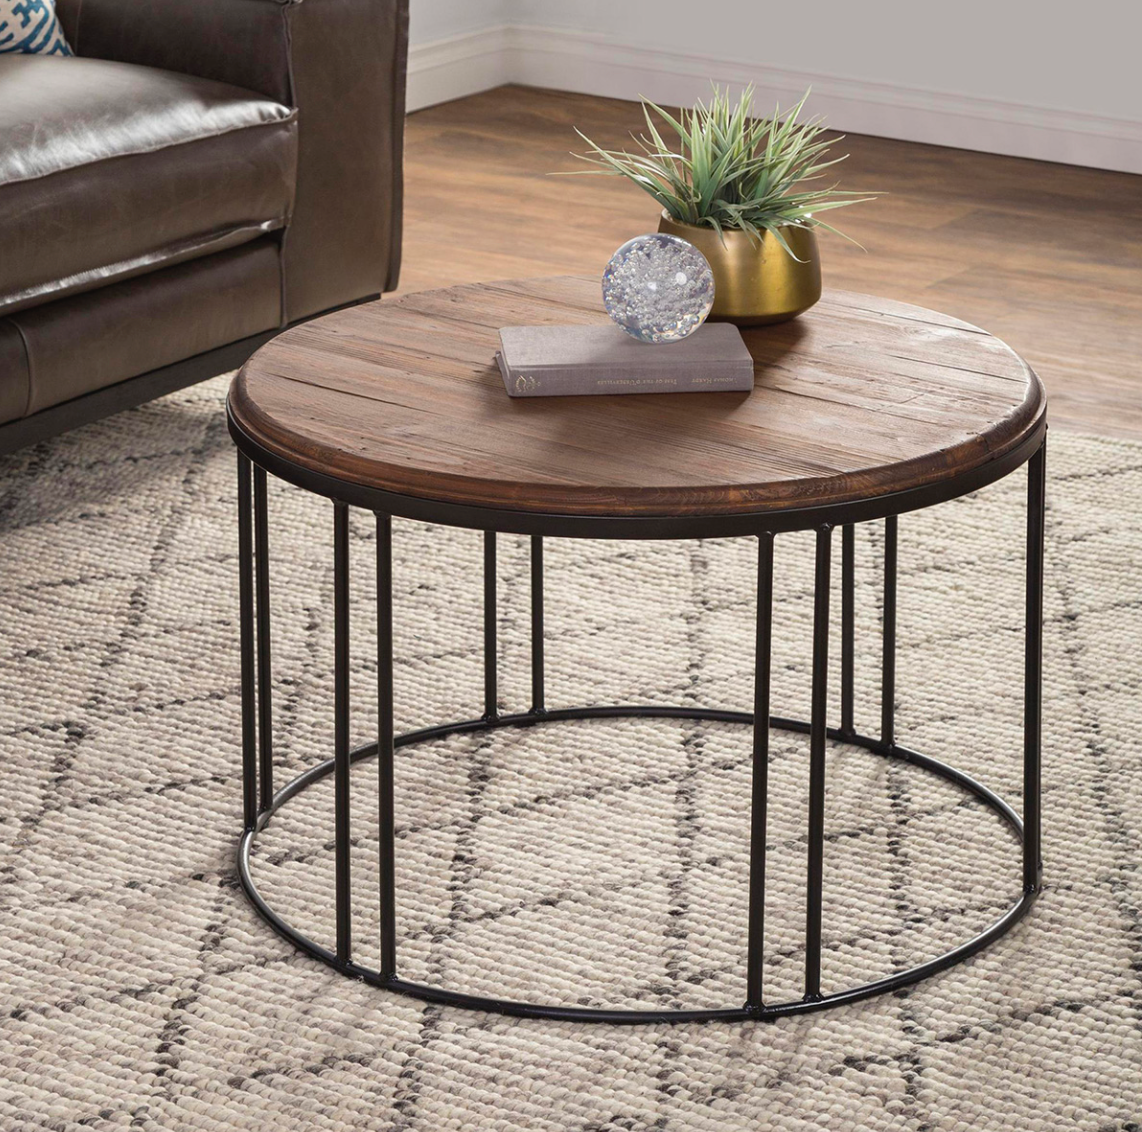 Adrian 28" Round Coffee Table - Natural + Iron